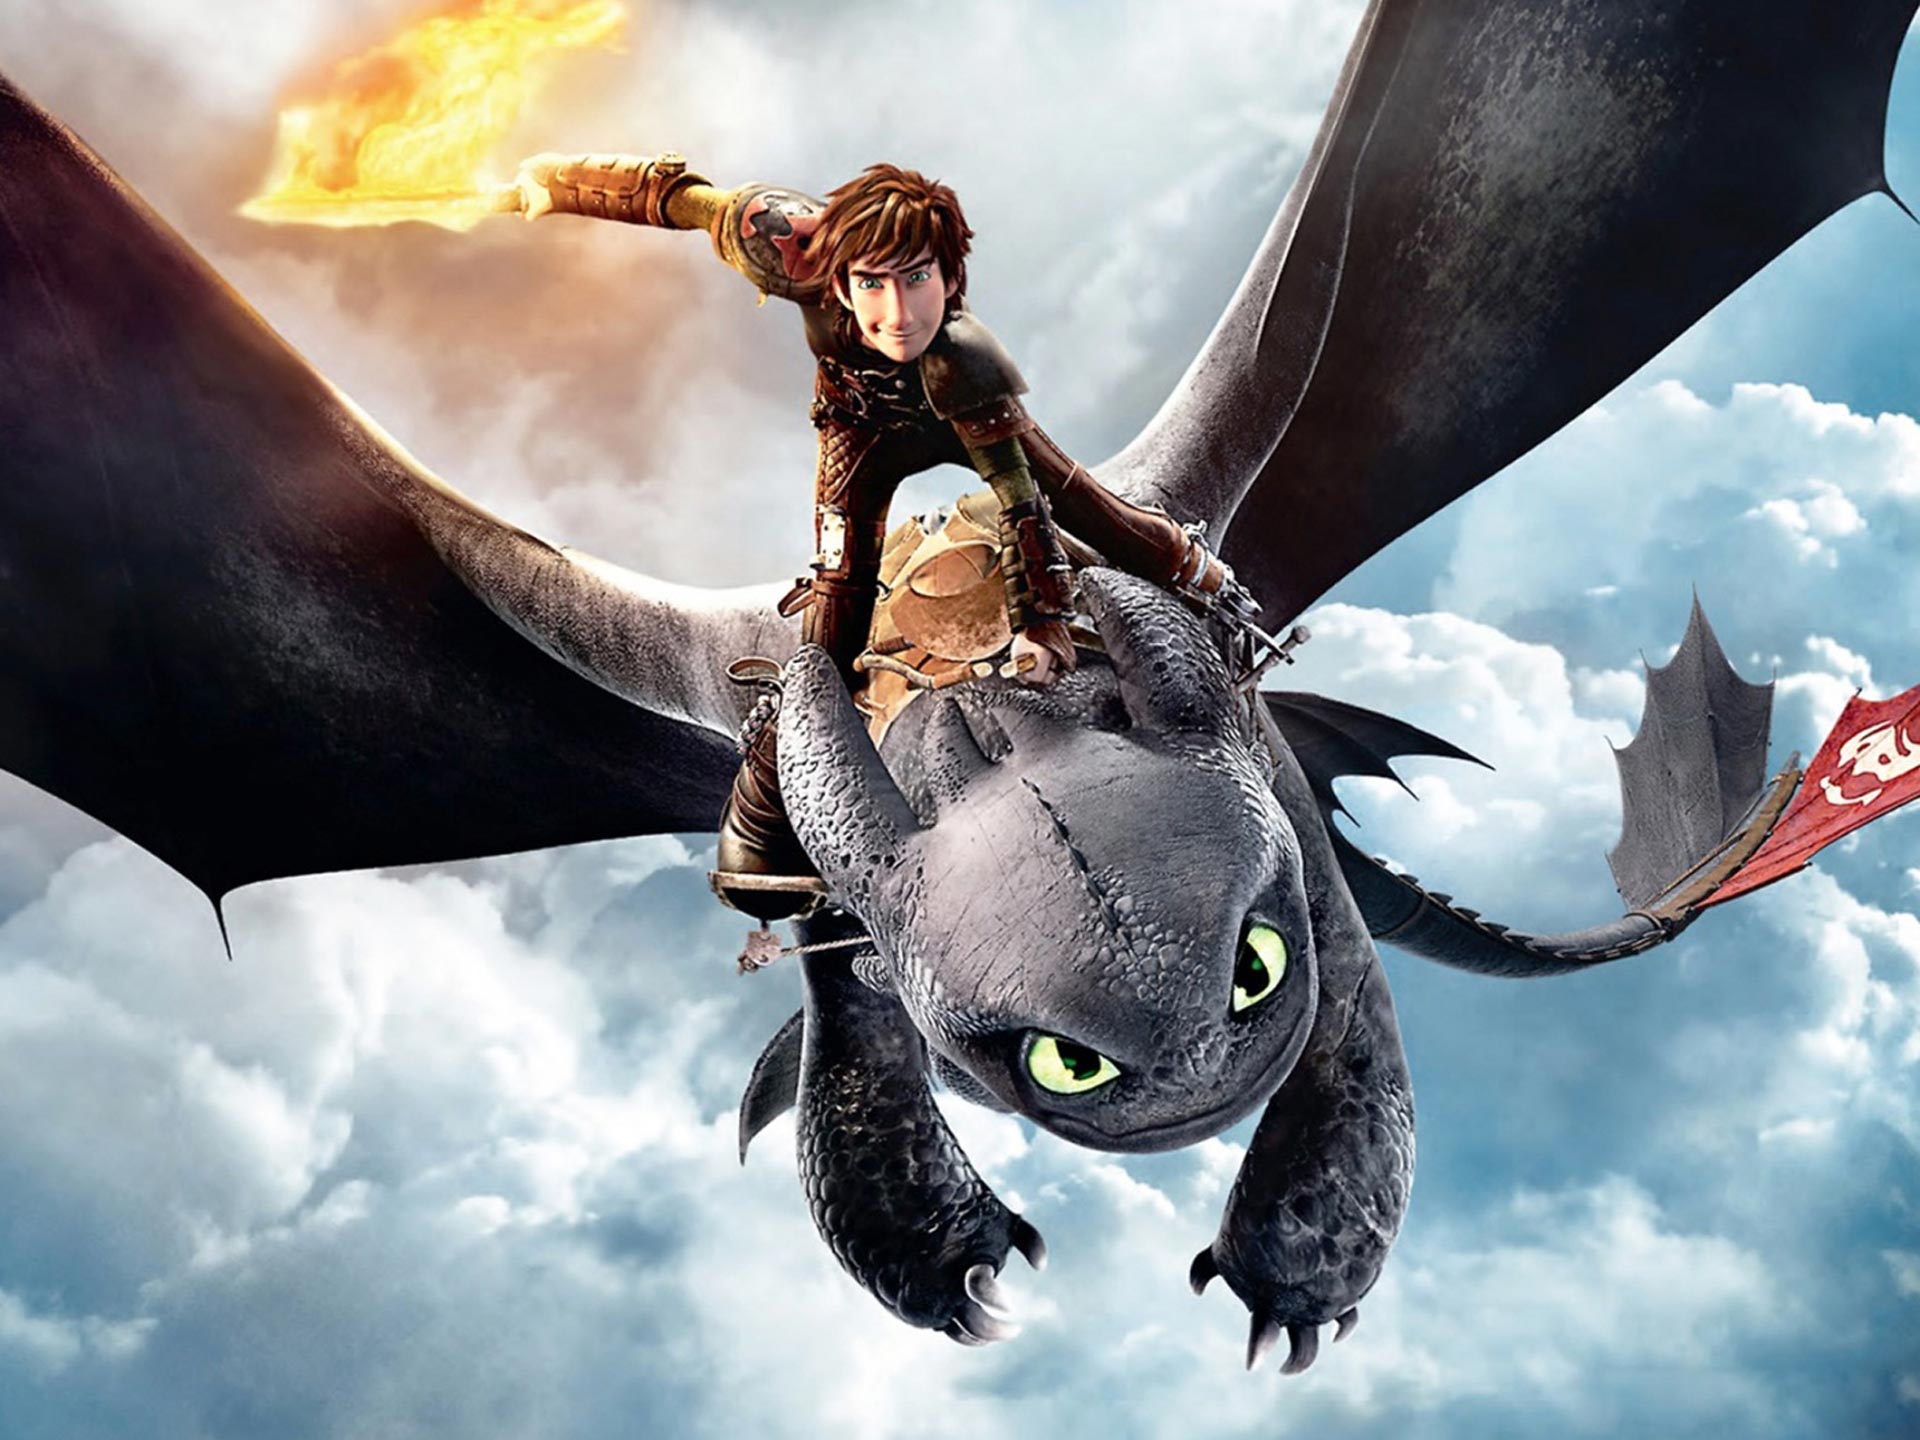 How to Train Your Dragon 2 - Hiccup riding Night Fury - 1920x1440